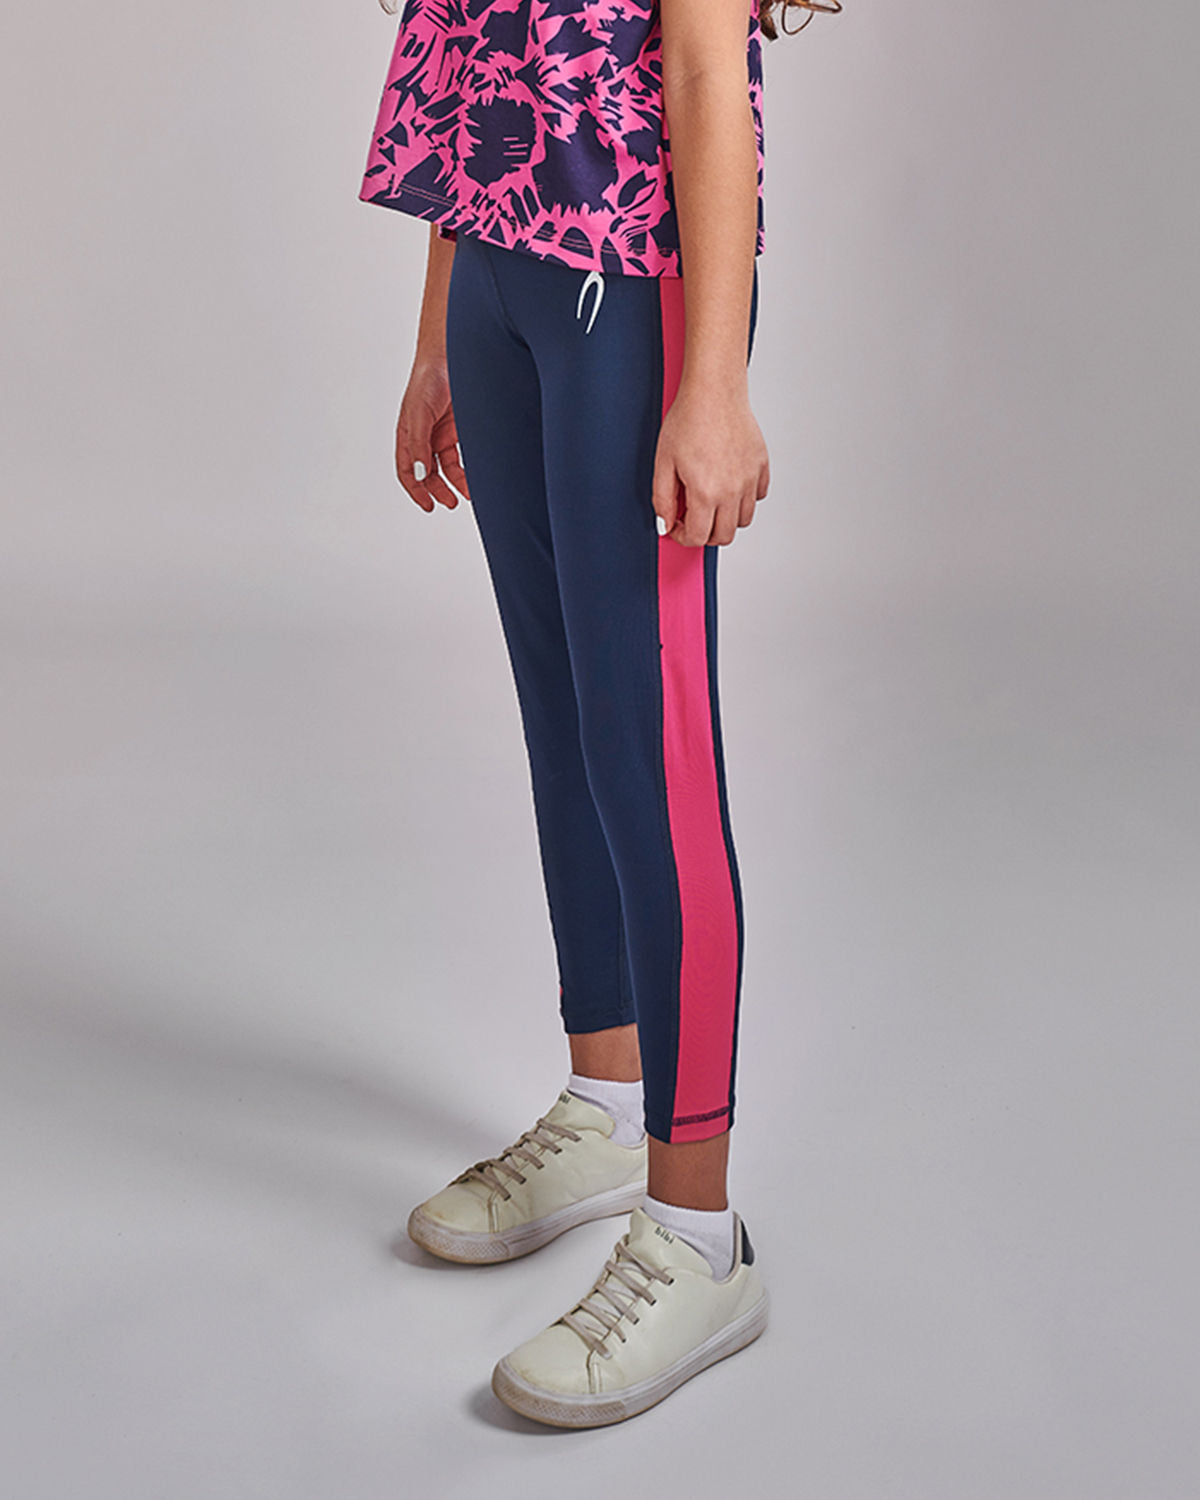 Photo by 𝗔𝗧𝗨𝗠 SPORTSWEAR ® on December 20, 2022. May be an image of 1 girl wears navy/pink leggings with atum emblem.